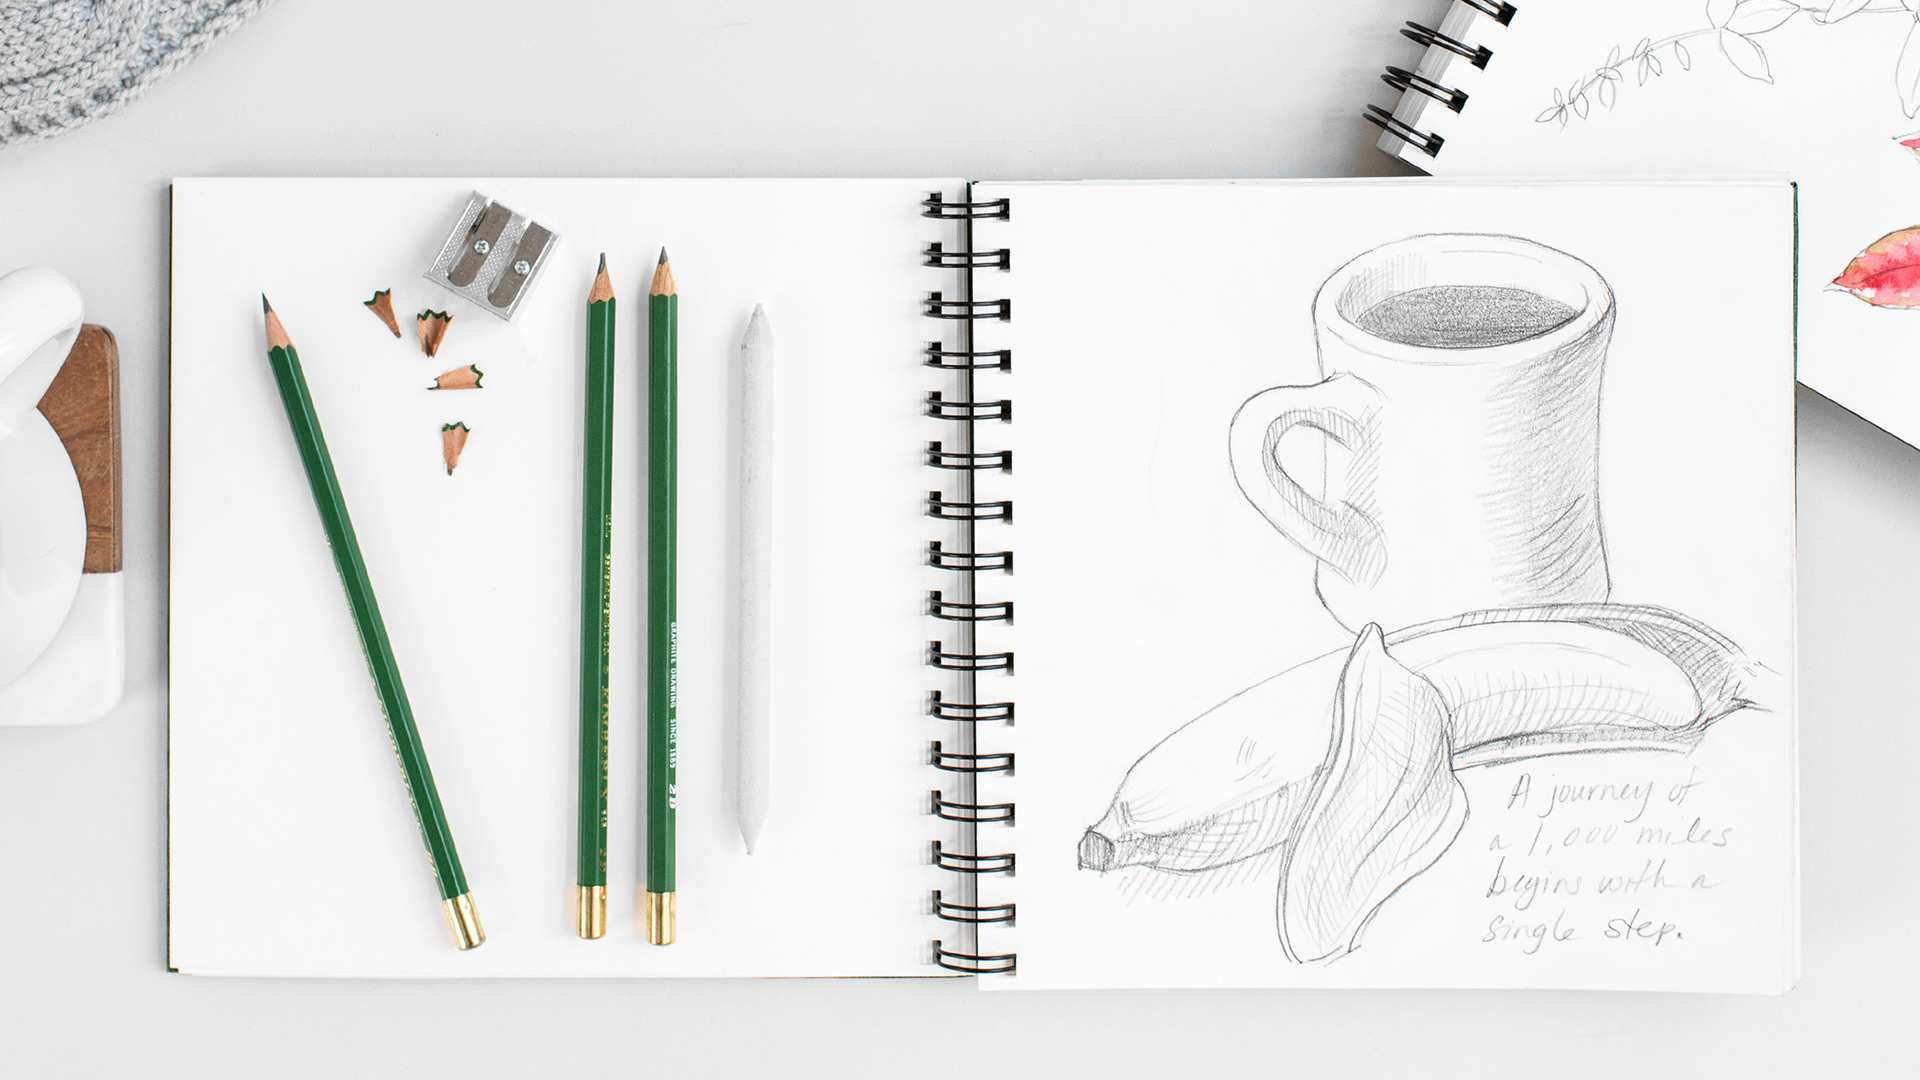 Discover the Best Art Resources and Tutorials at Drawing Den